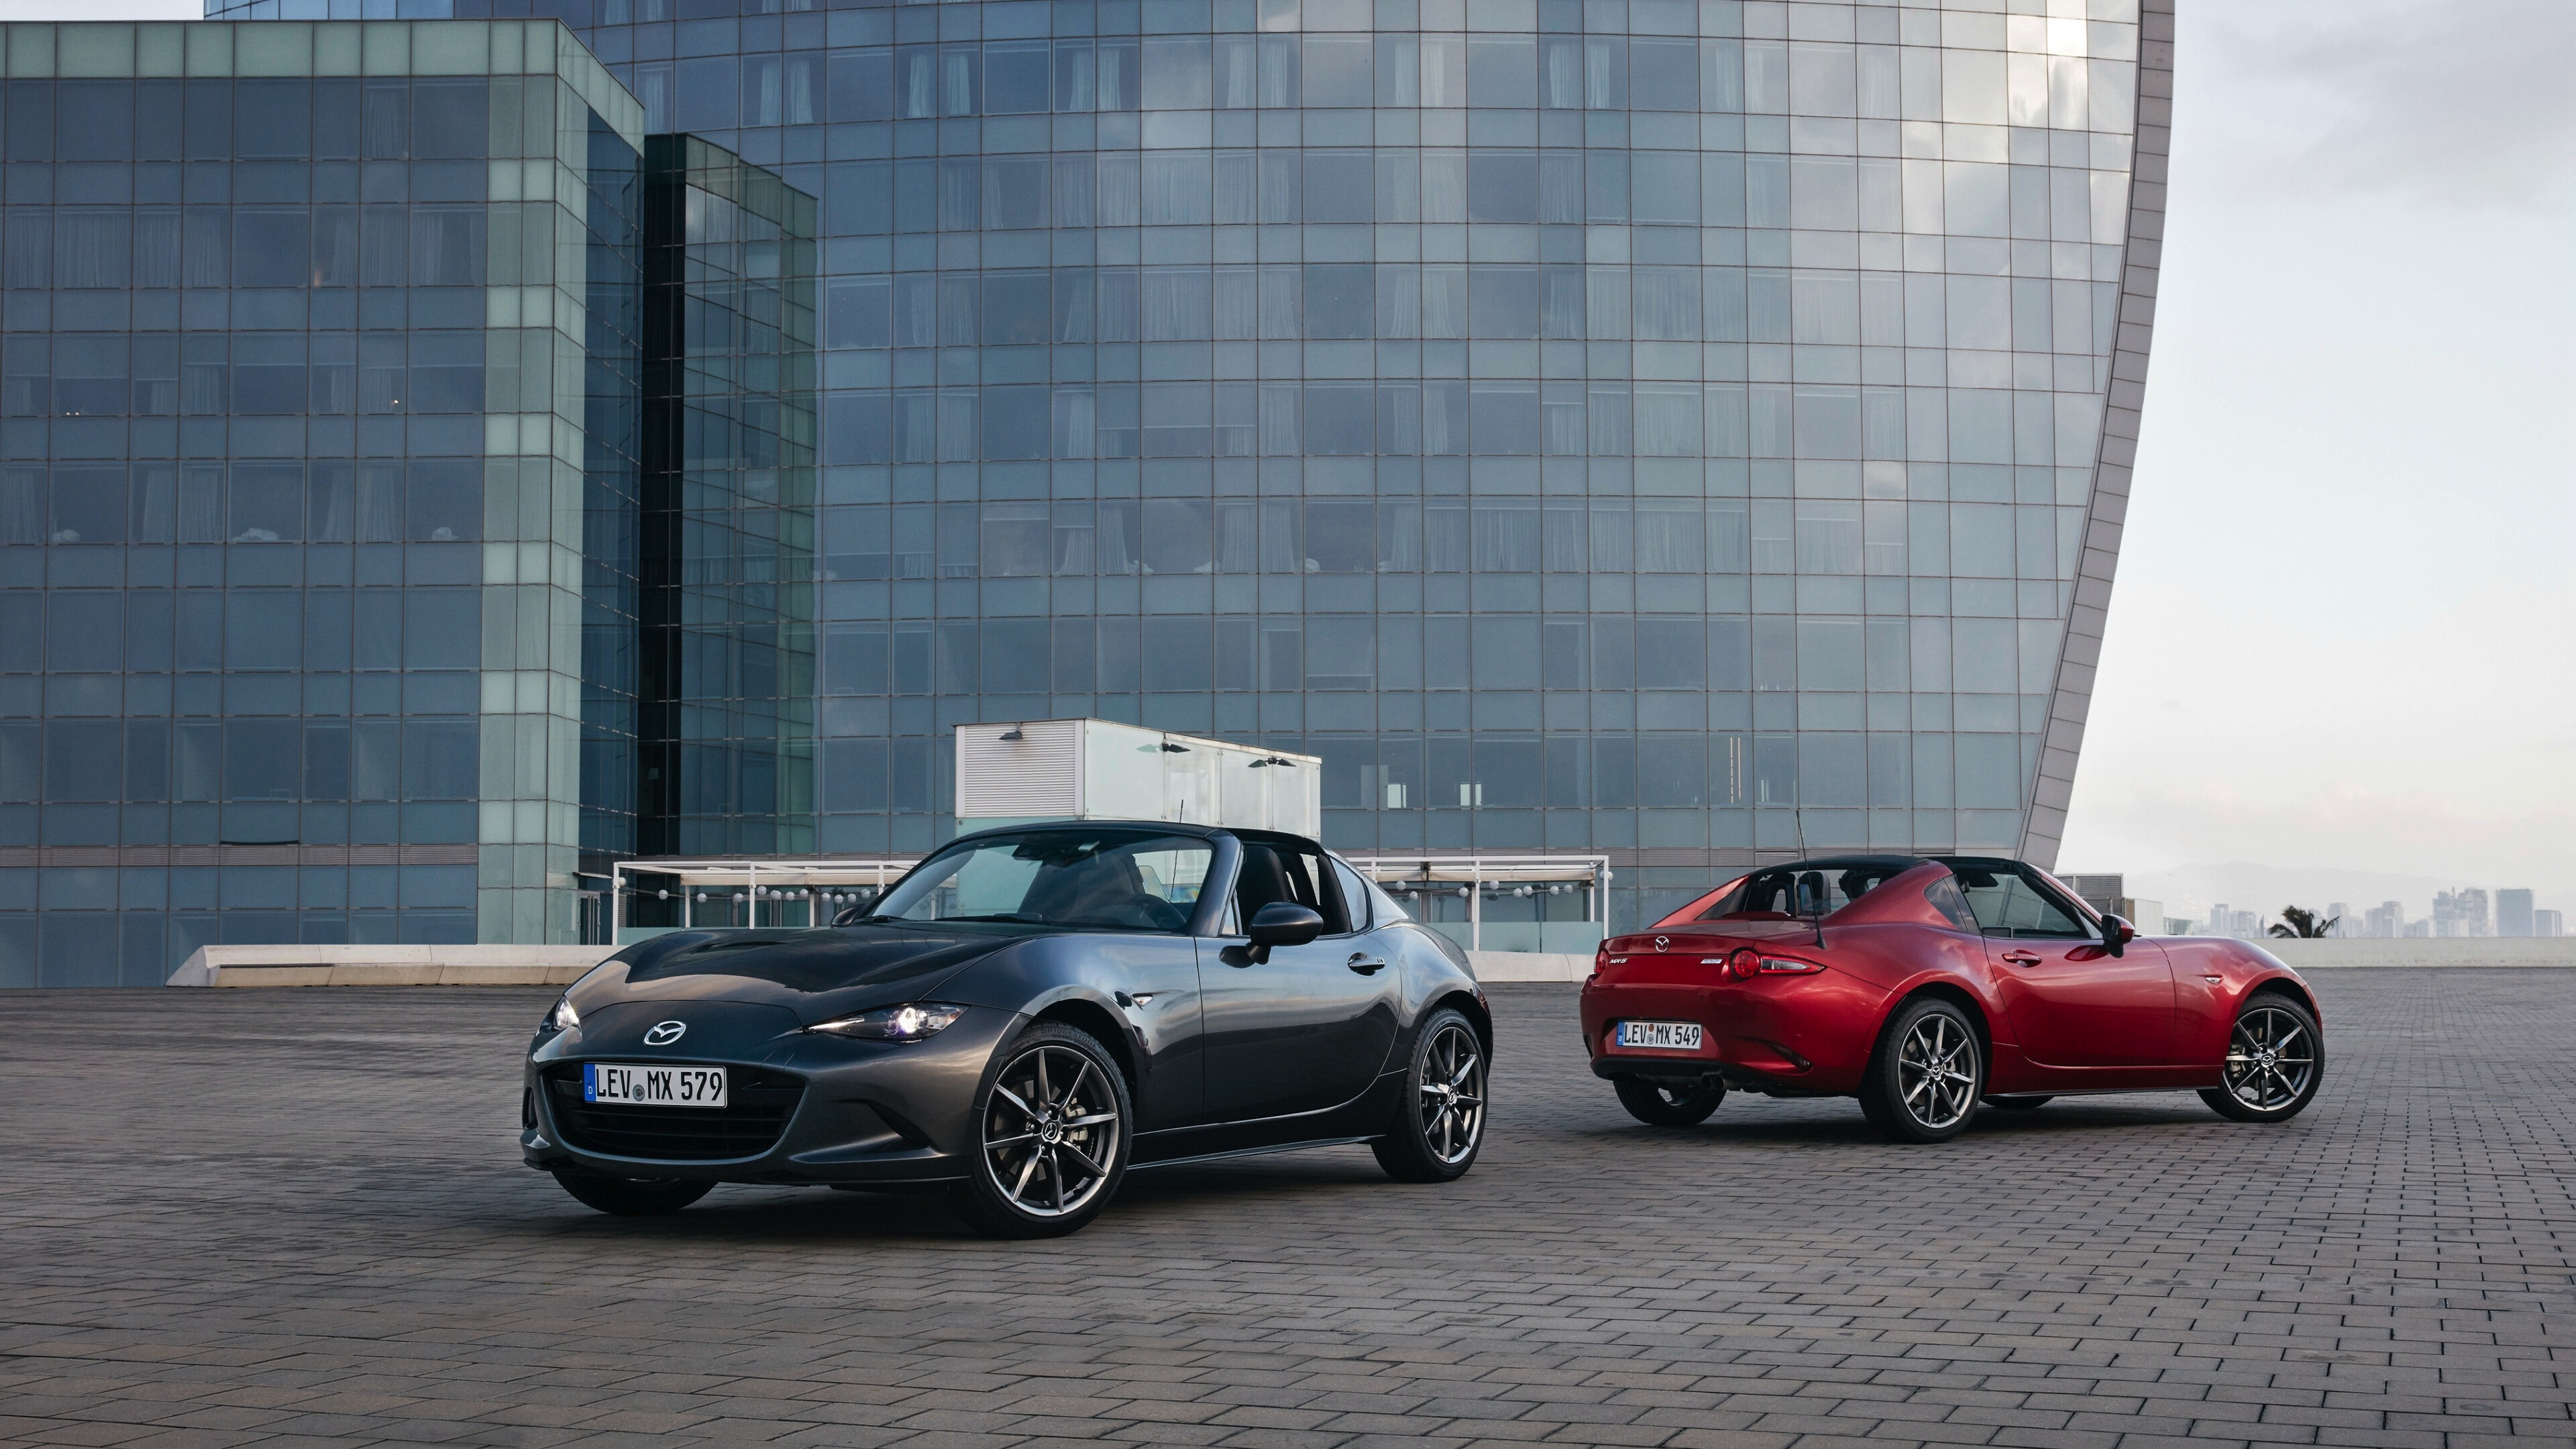 Mazda: One of the world’s premier automakers, producing sporty and efficient vehicles, MX-5. 3840x2160 4K Background.